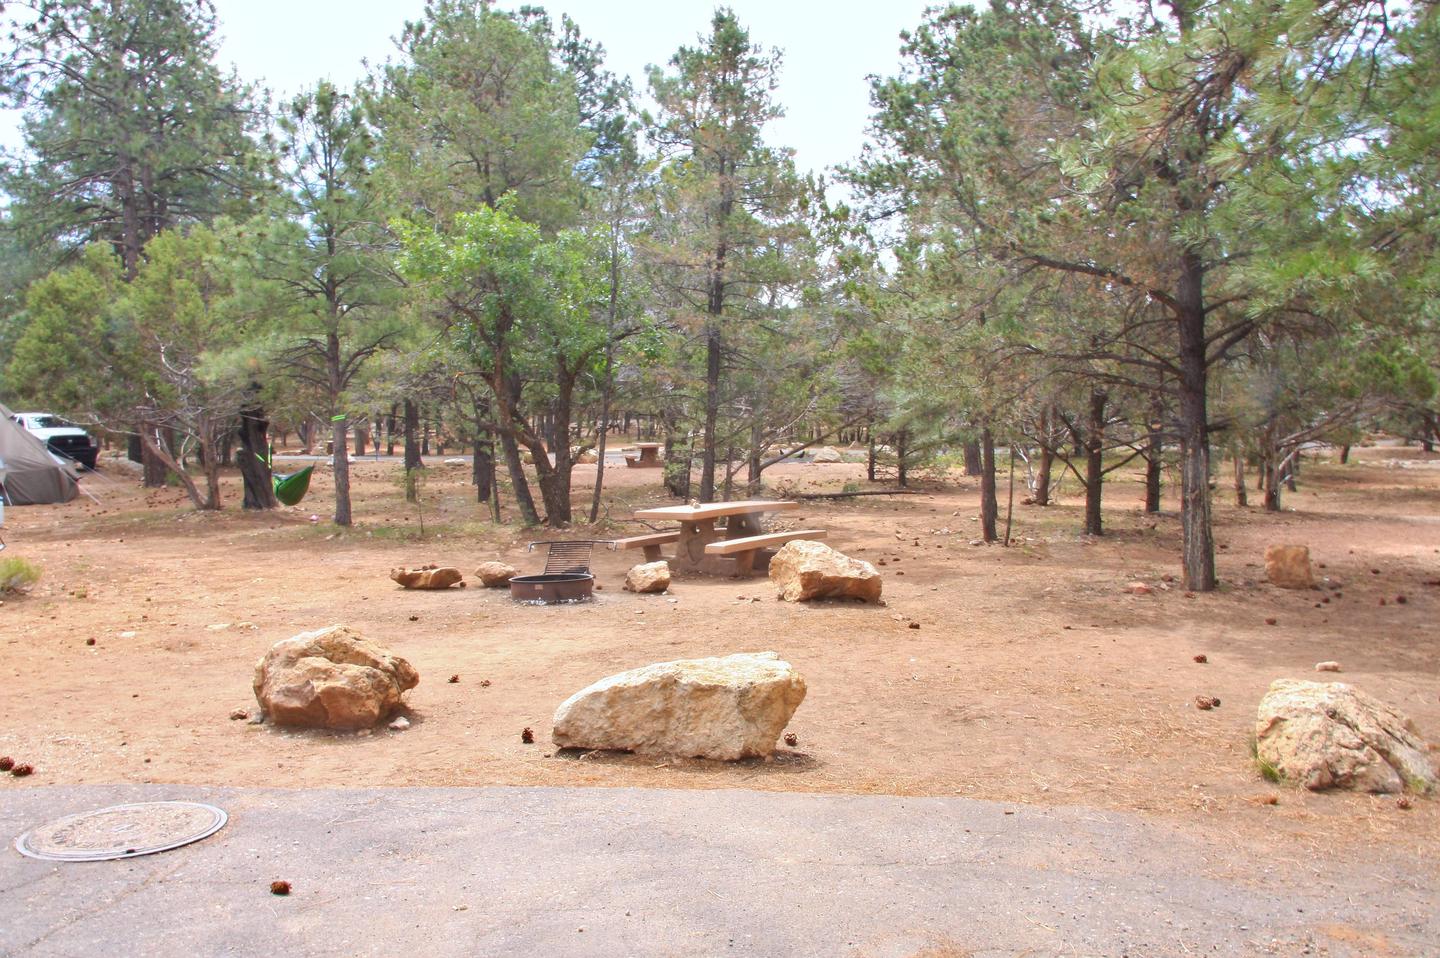 Picnic table, fire pit, and parking spot, Mather CampgroundPicnic table, fire pit, and parking spot for Pine Loop 282, Mather Campground